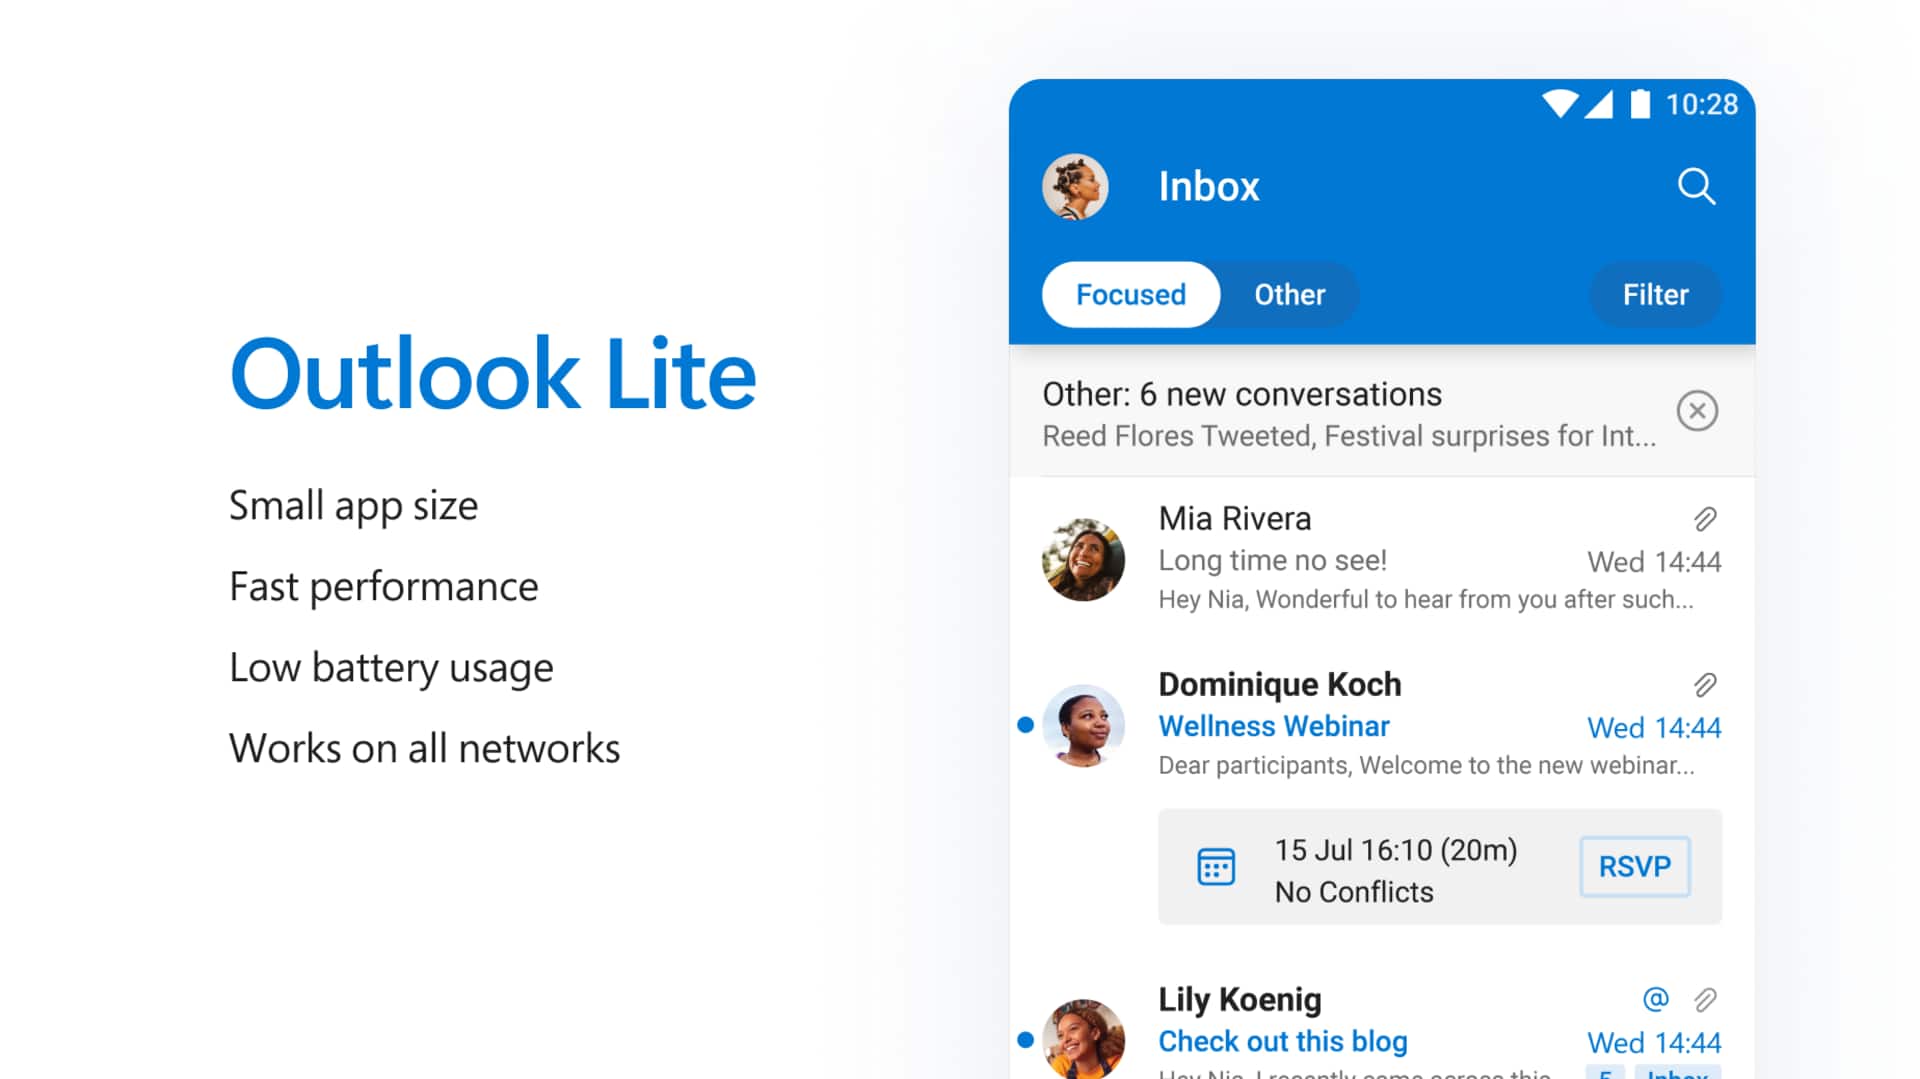 Microsoft Outlook Lite gets new features including transliteration, voice typing